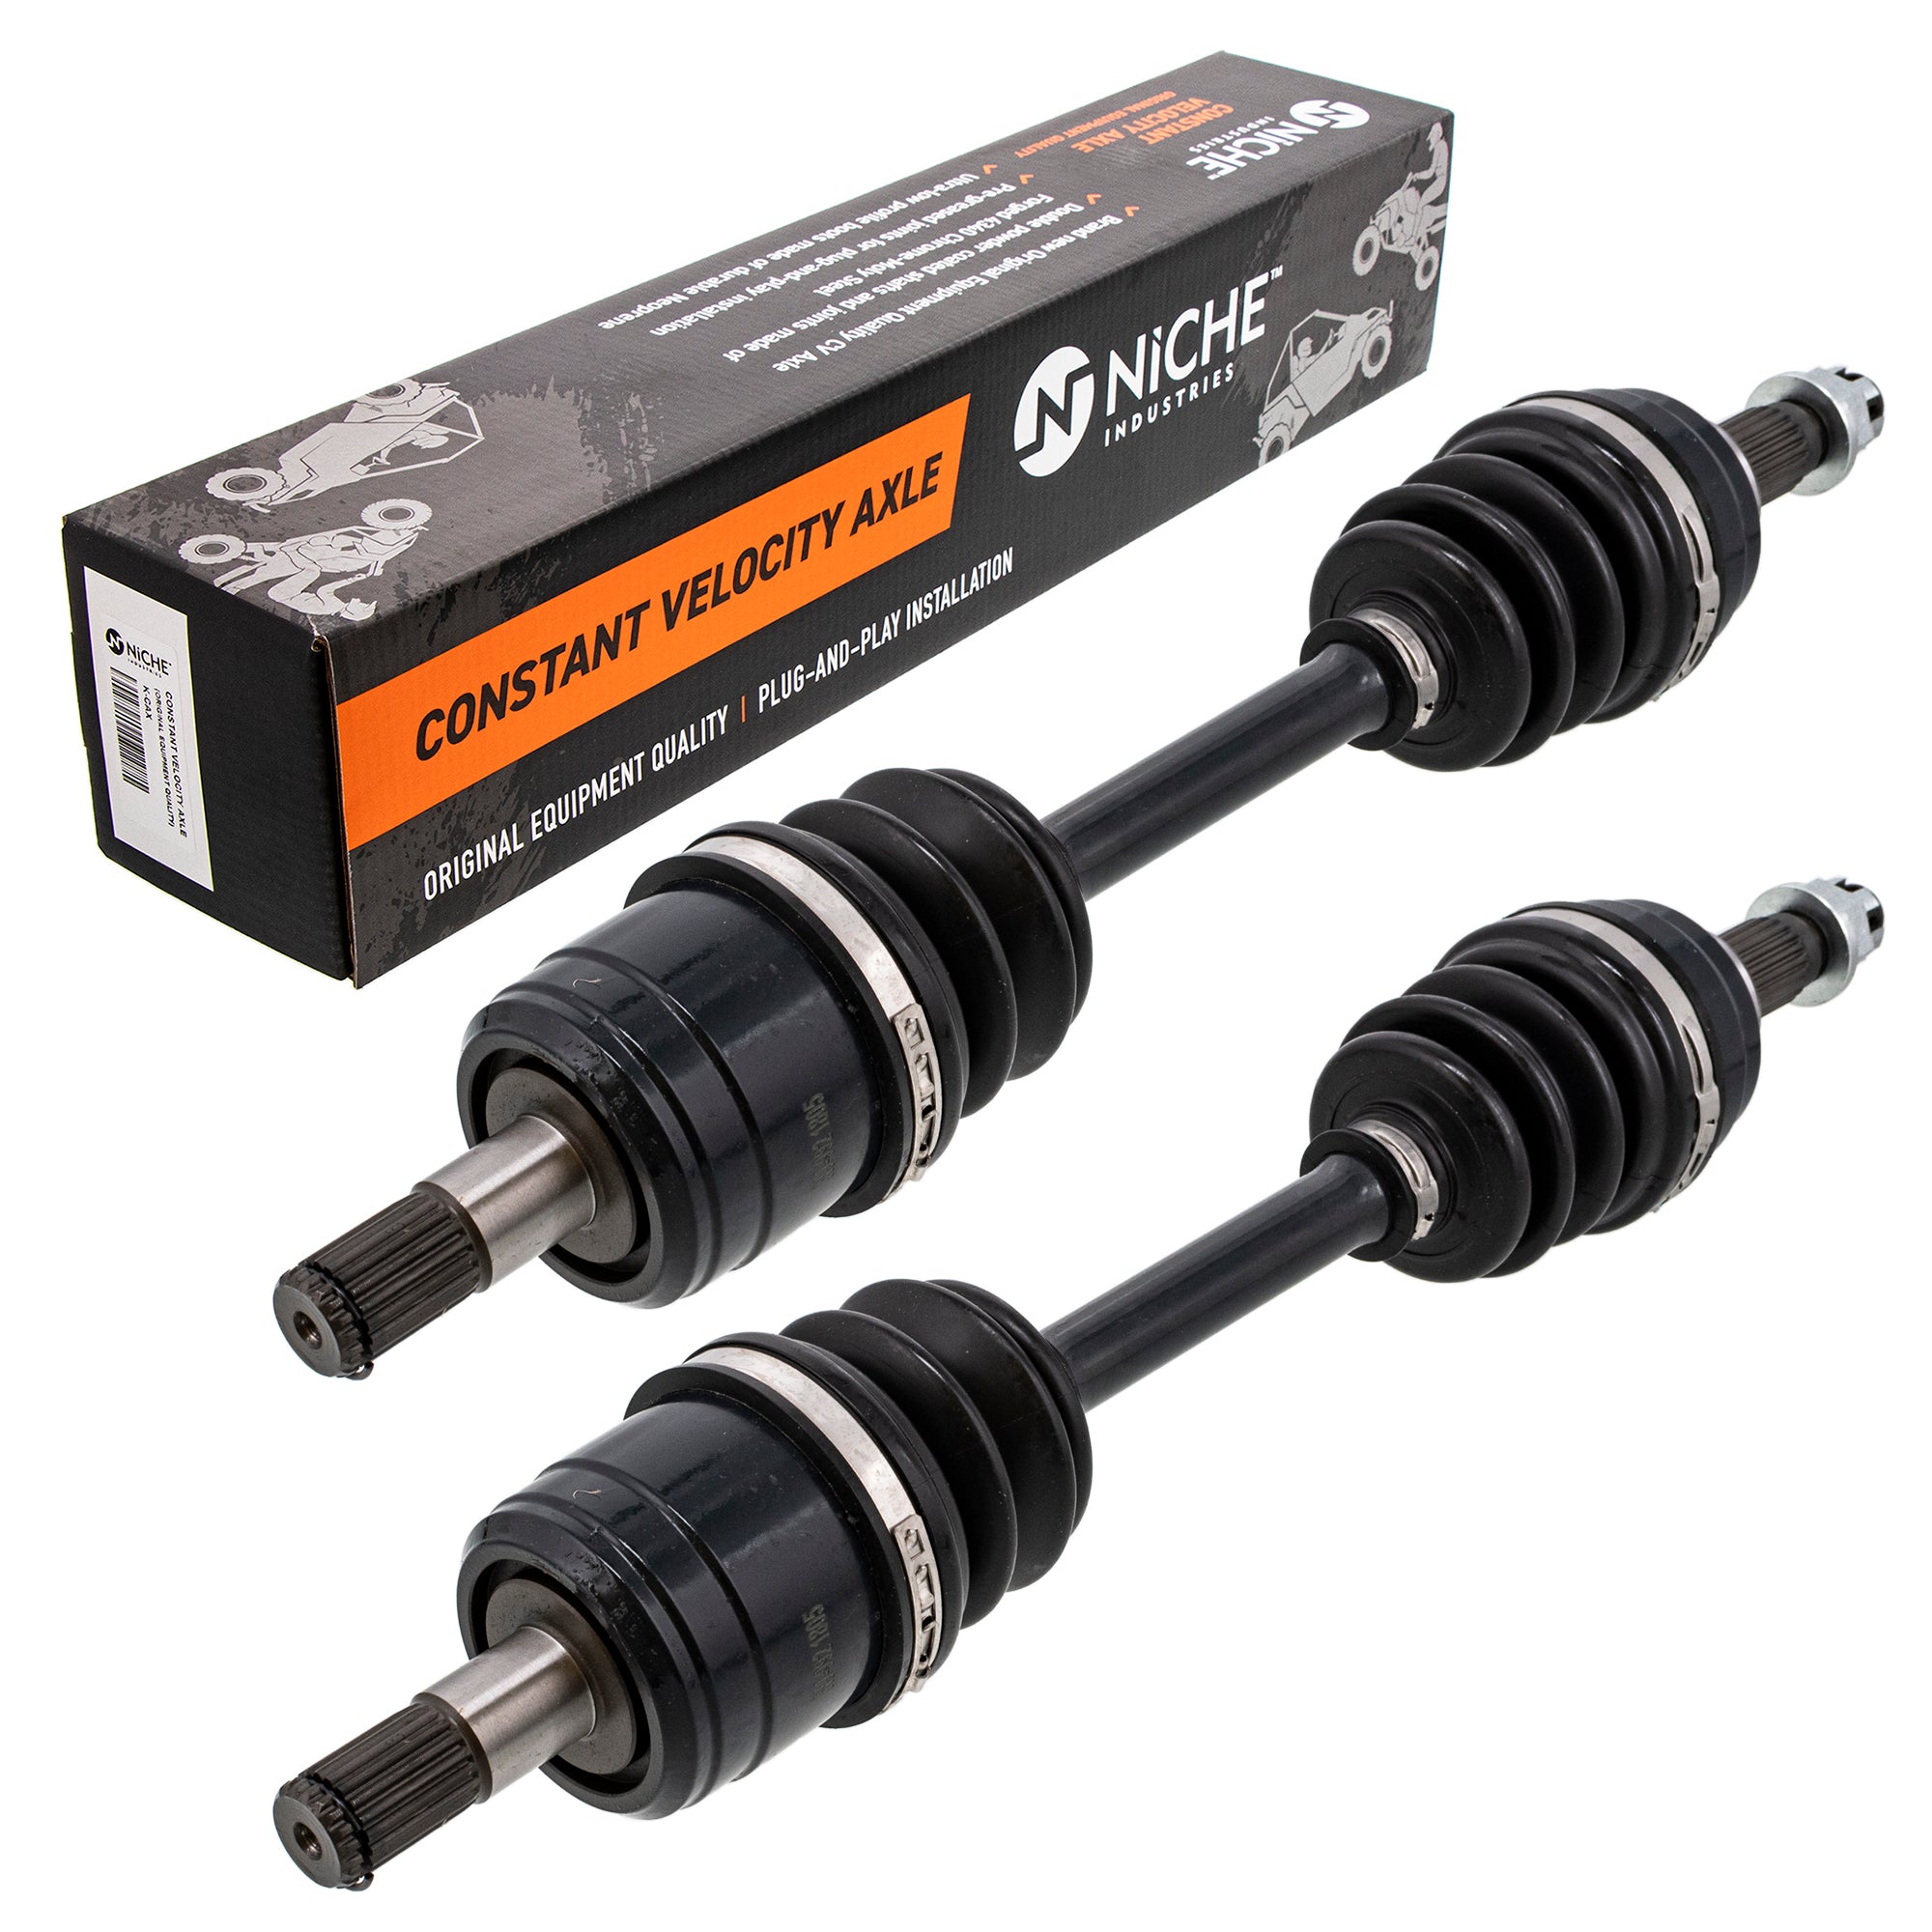 High Strength Front CV Axle Set 2-Pack for zOTHER FourTrax 42350-HN5-671 42220-HM7-003 NICHE 519-KCA2283X